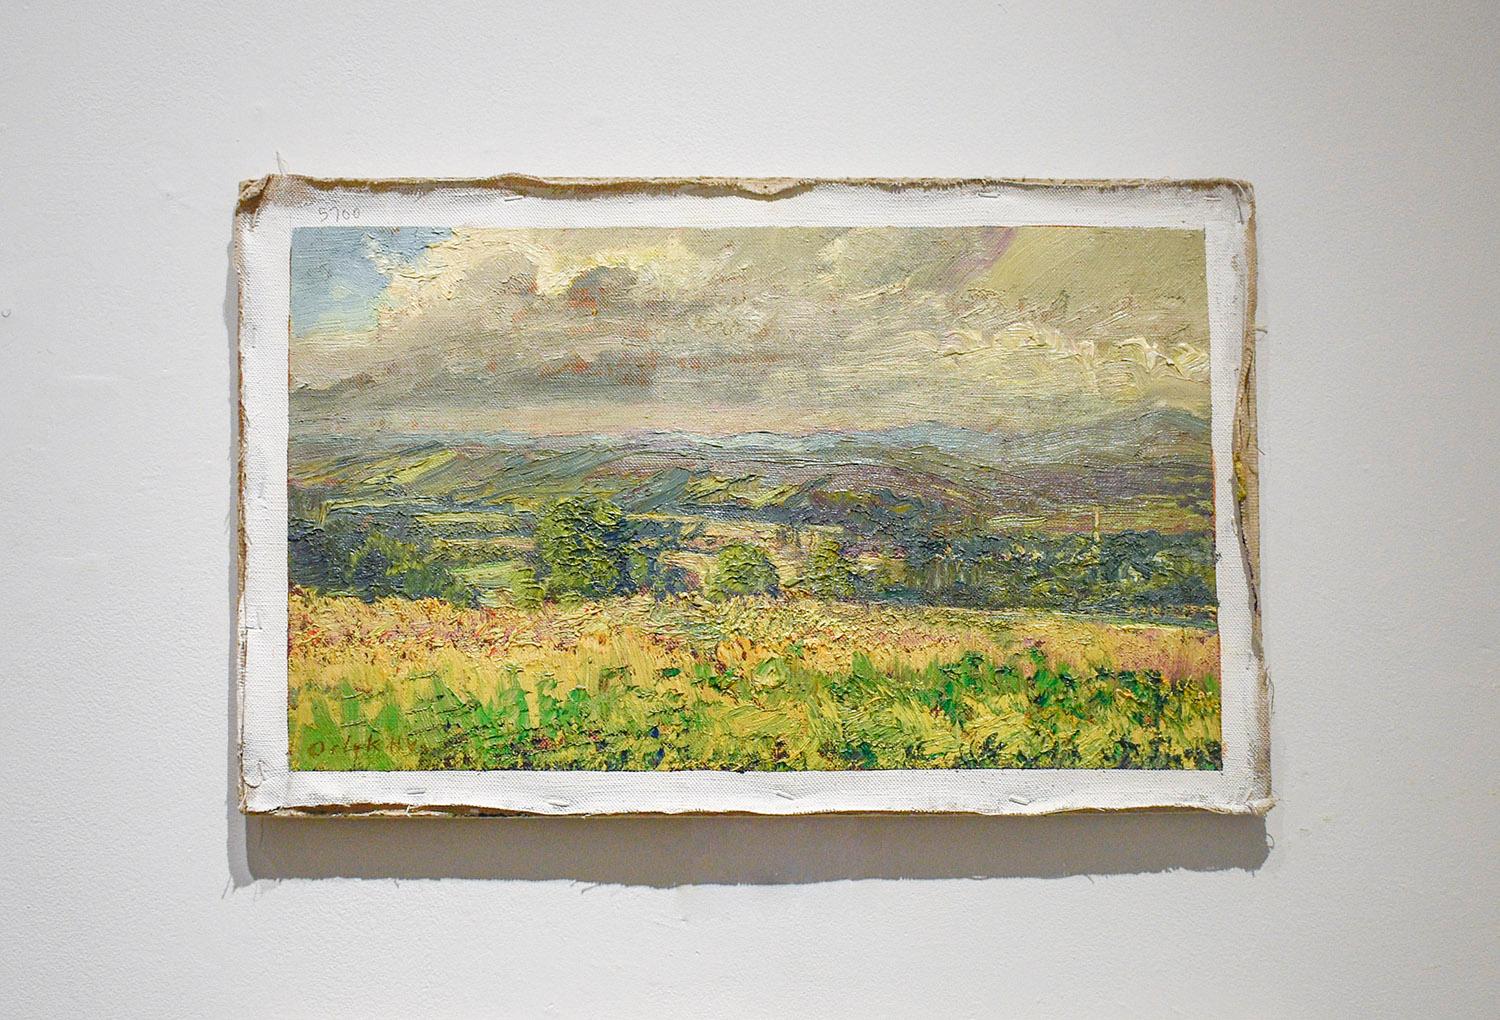 Impressionistic, en plein air summer landscape of a sunlit valley with clouded blue sky
#5700 View from Saw Hill, painted by Harry Orlyk in 2019
oil on linen mounted on homasote board, ready to hang as is 
11.75 x 19.75 inches unframed 
Signed lower